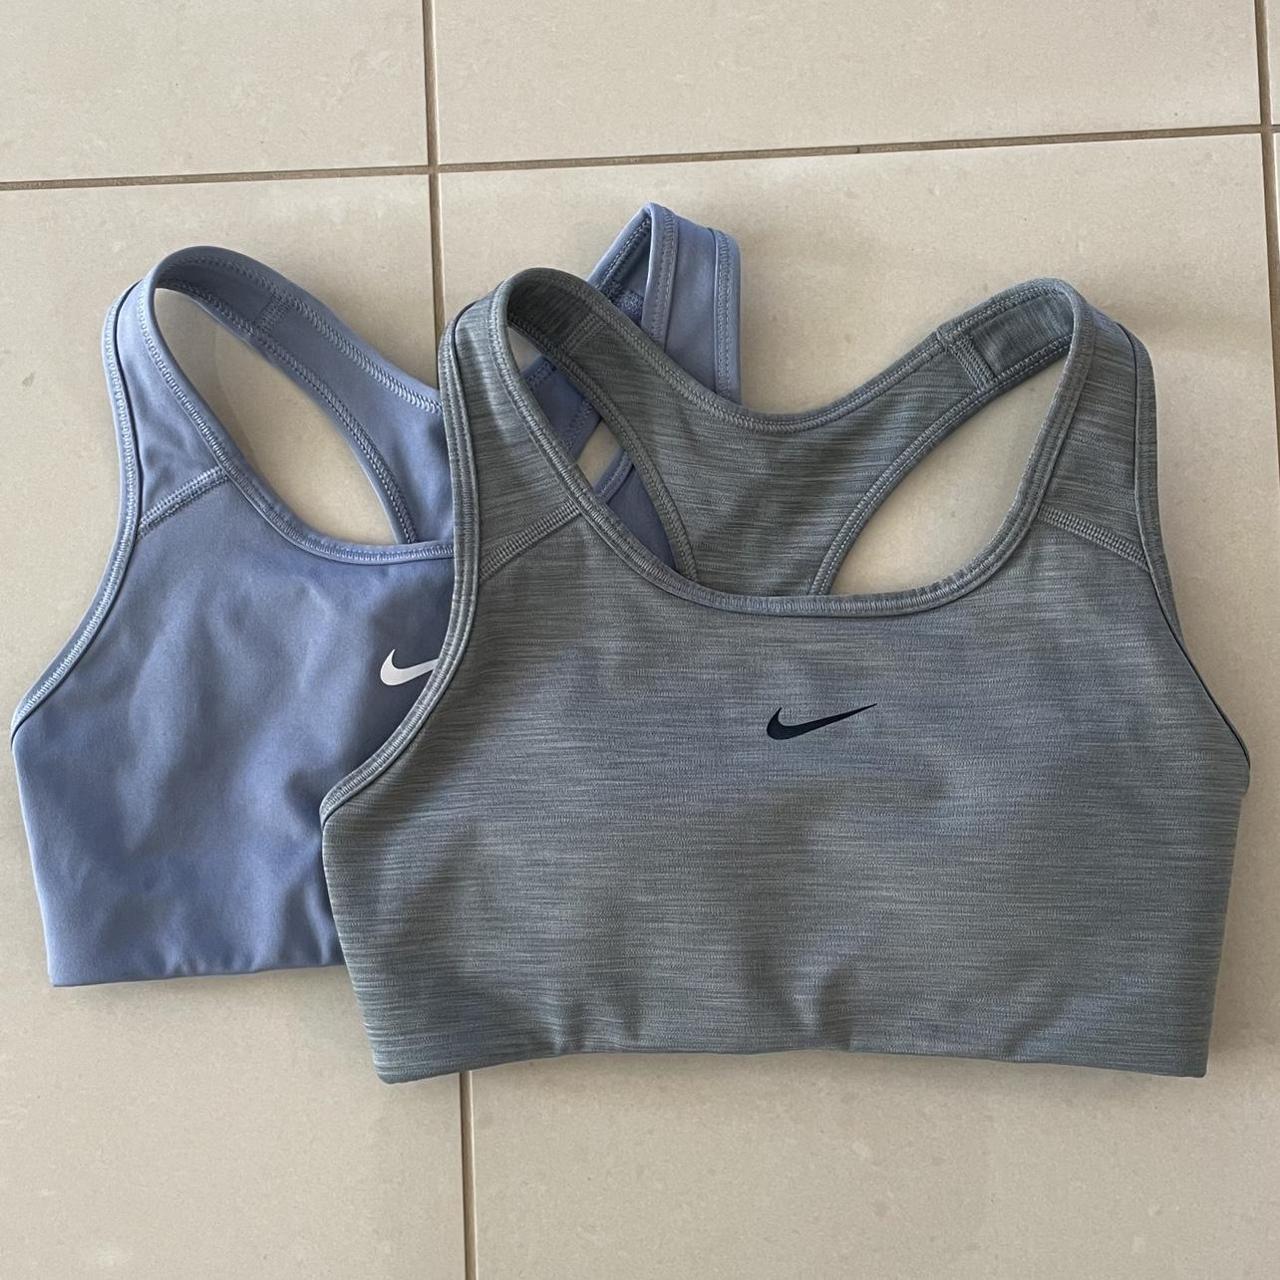 Nike sports bra bundle Xs and S Both fit relatively - Depop